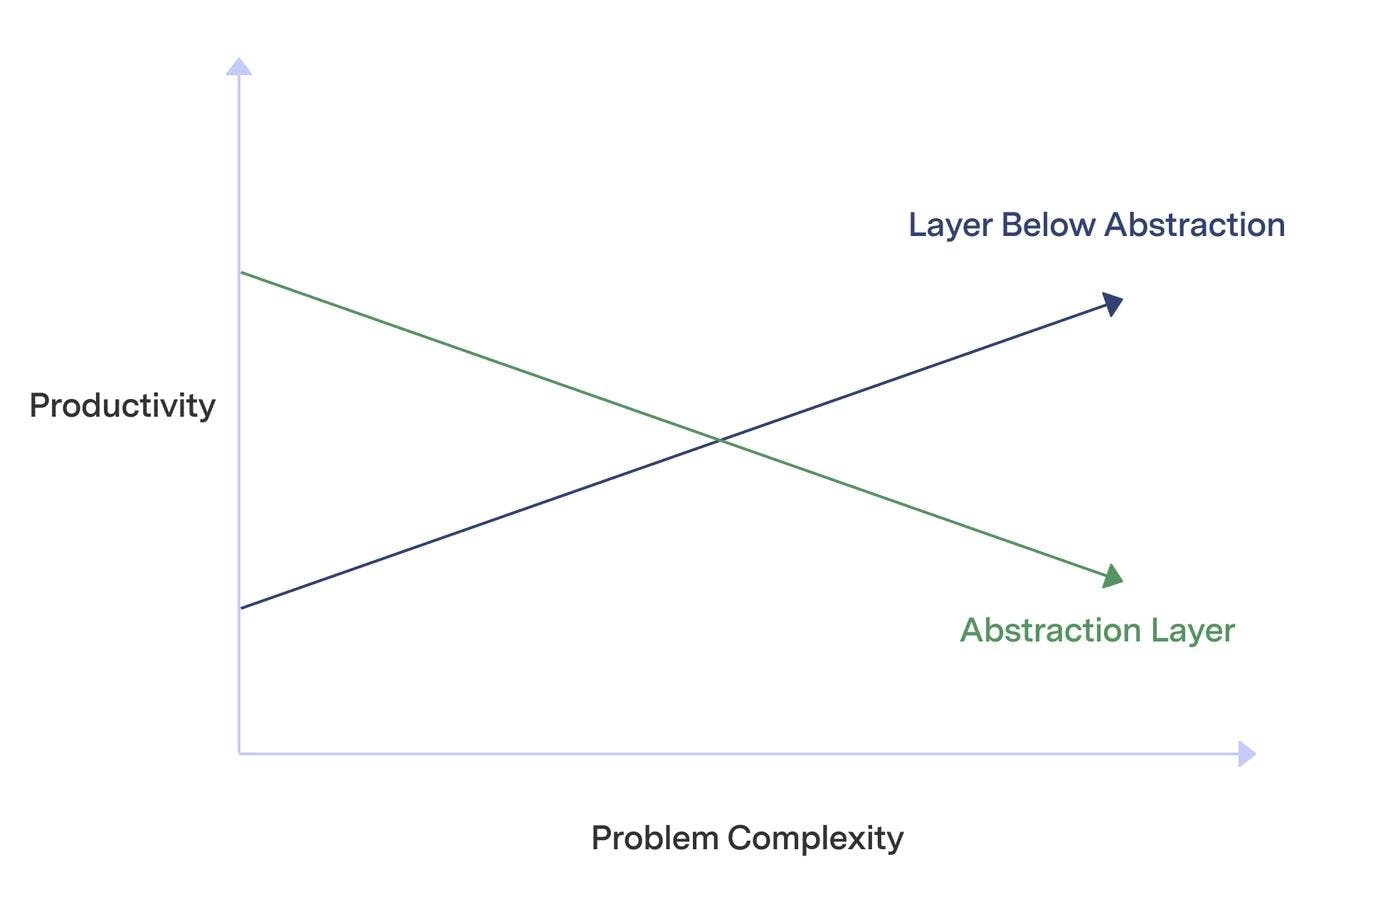 As use cases become more complex, abstraction layers in software can eventually become a drag on developer productivity